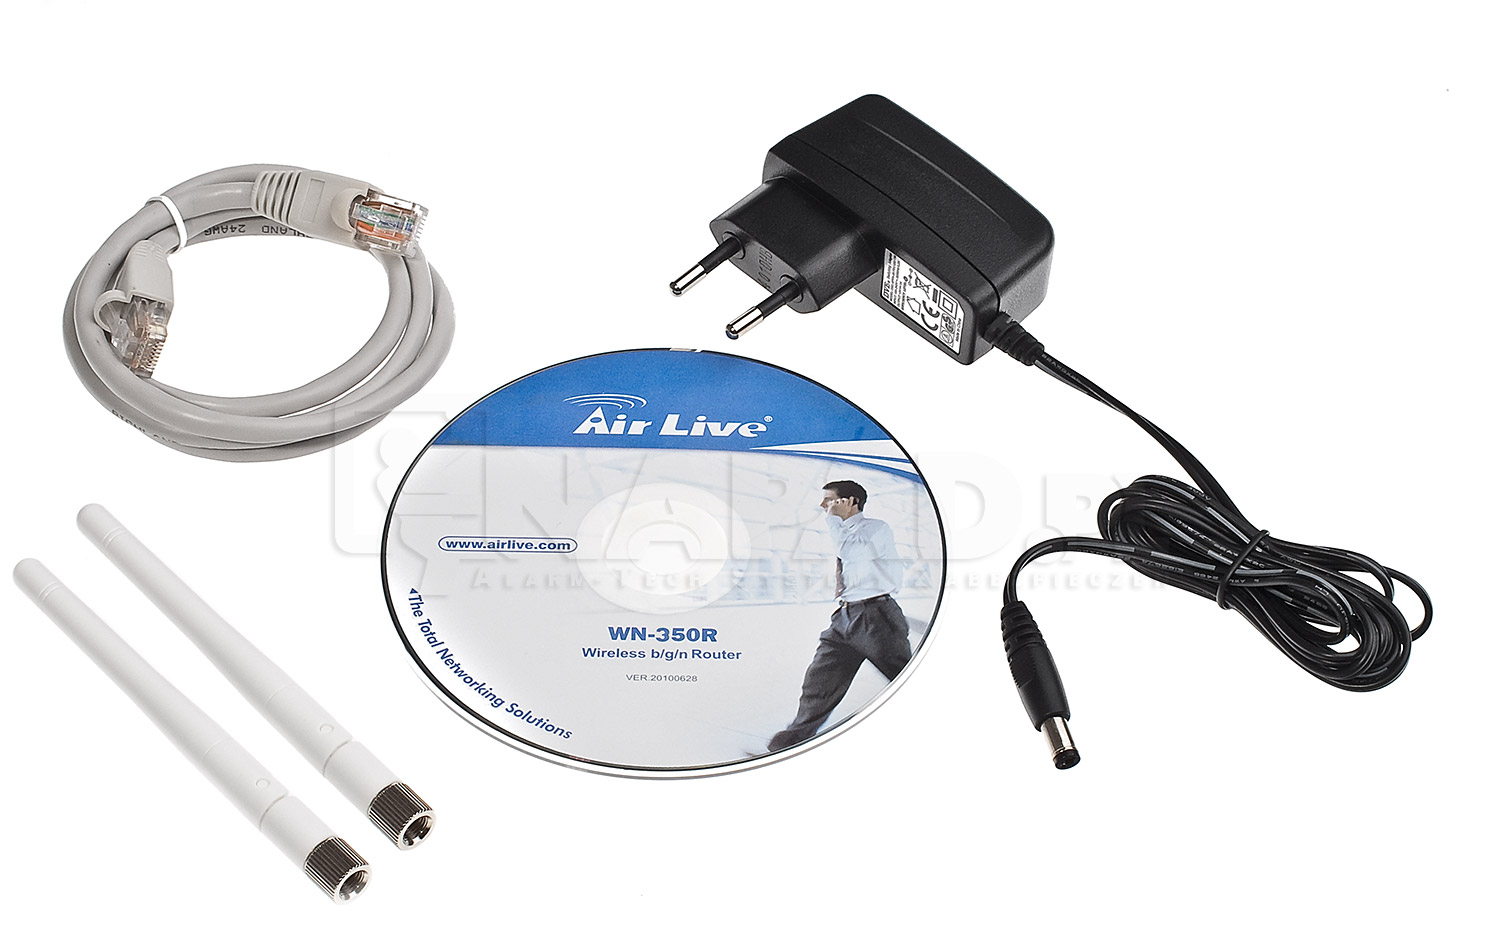 Akcesoria - Access point WN-350R Airlive